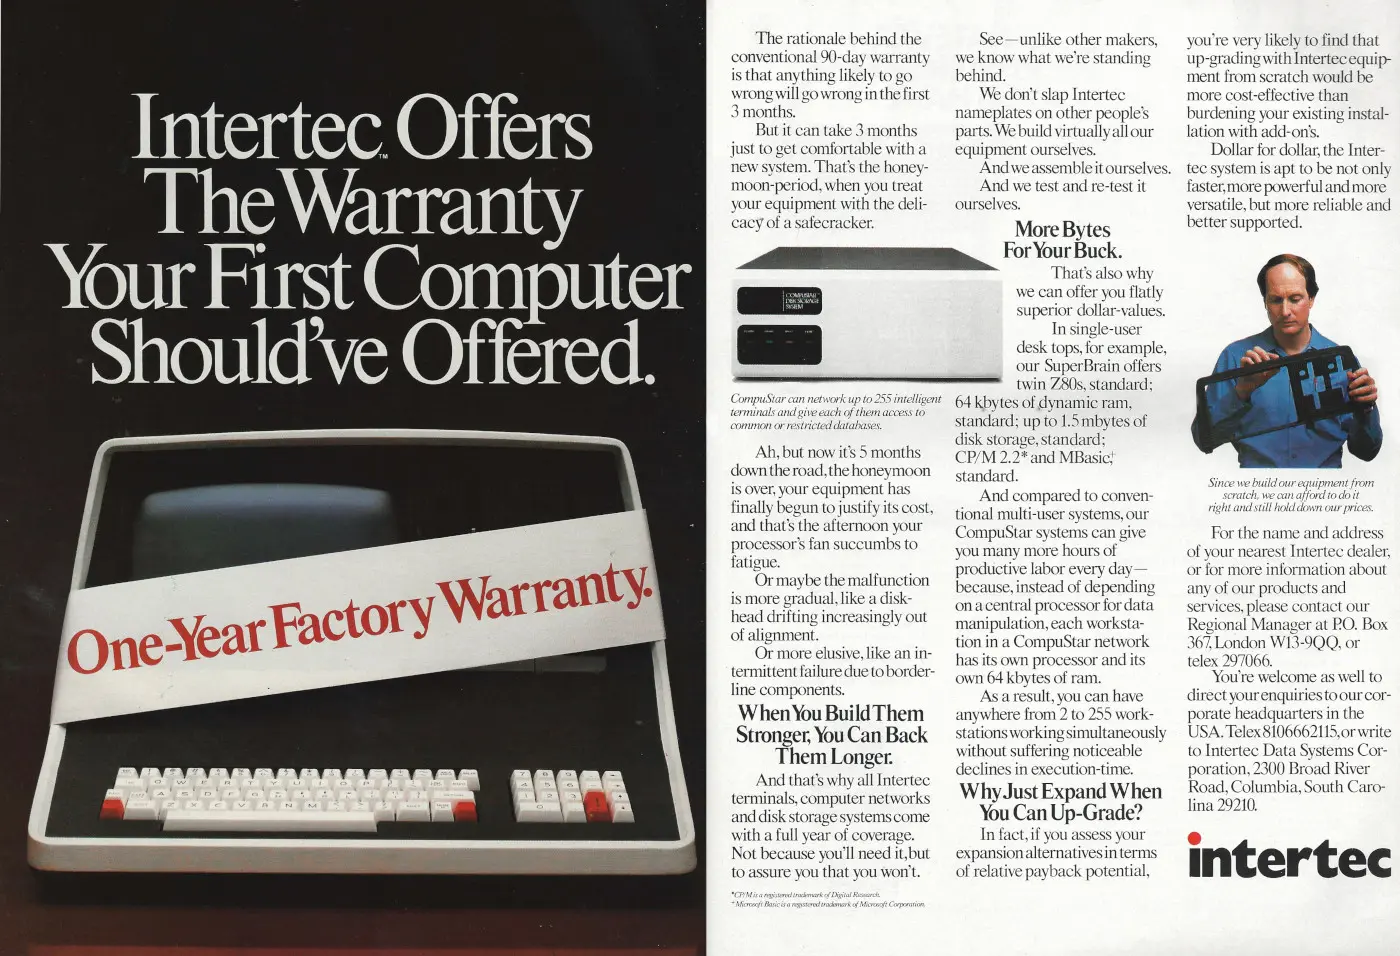 Intertec Advert: Intertec offers the warranty your first computer should have offered, from Personal Computer World, September 1983